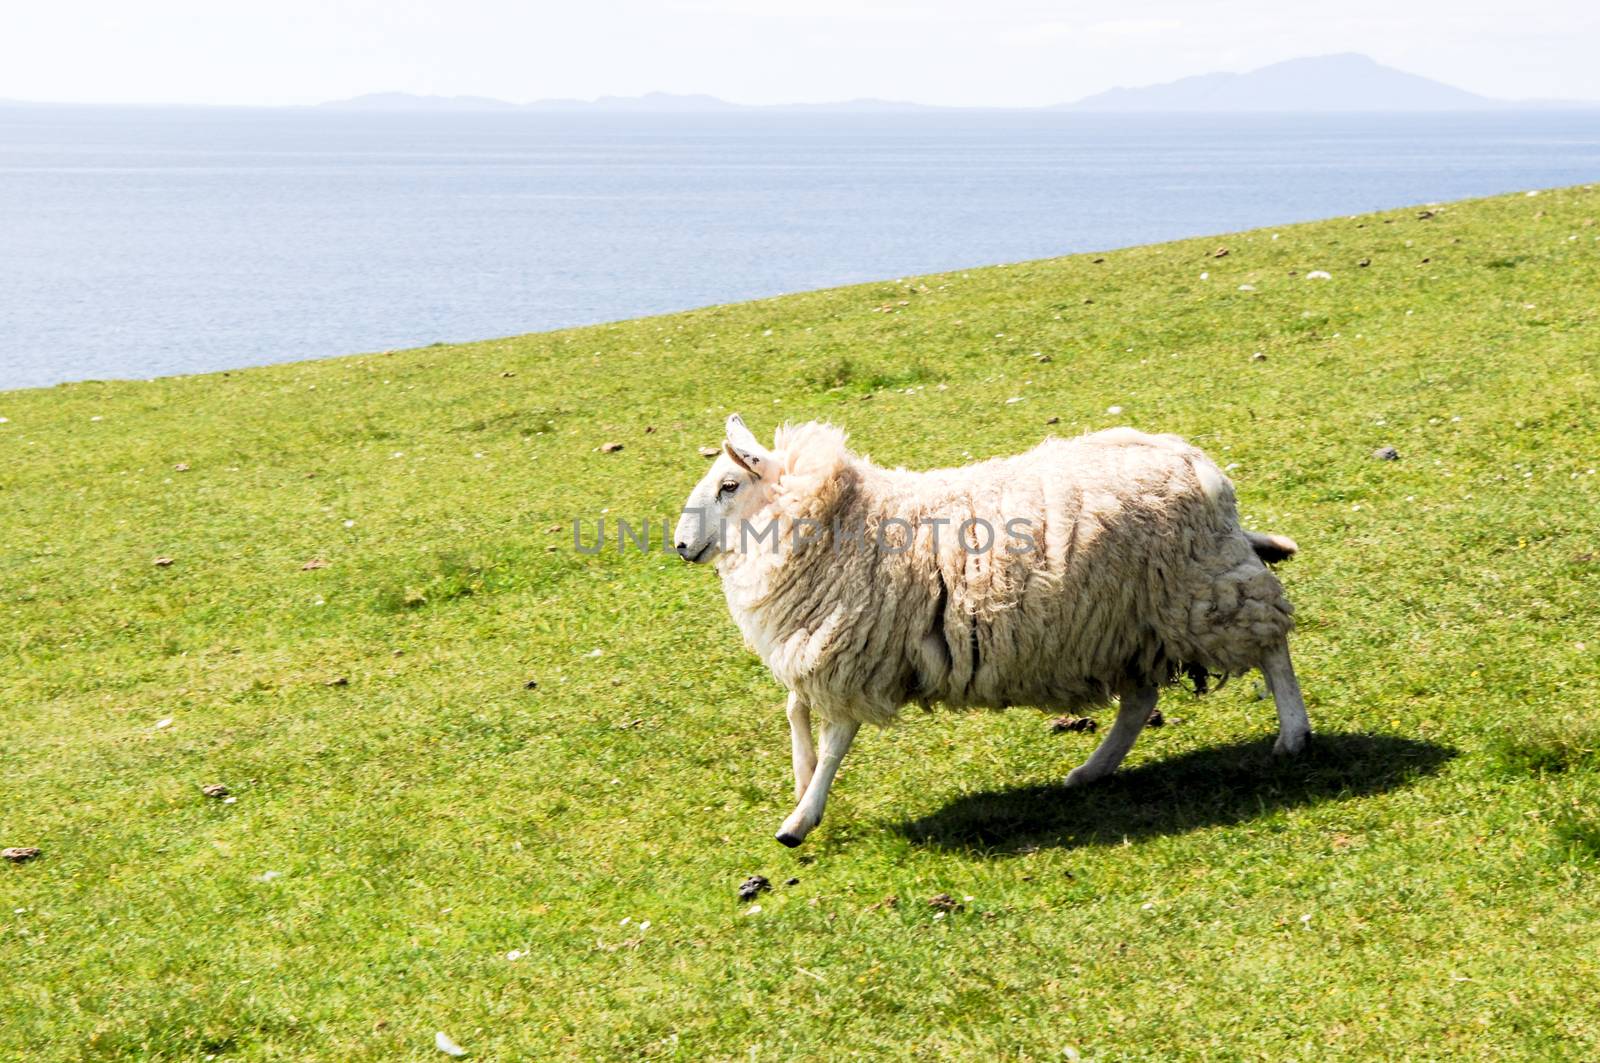 Lamb running quickly over a green field along the coast on the Isle of Skye in Scotland